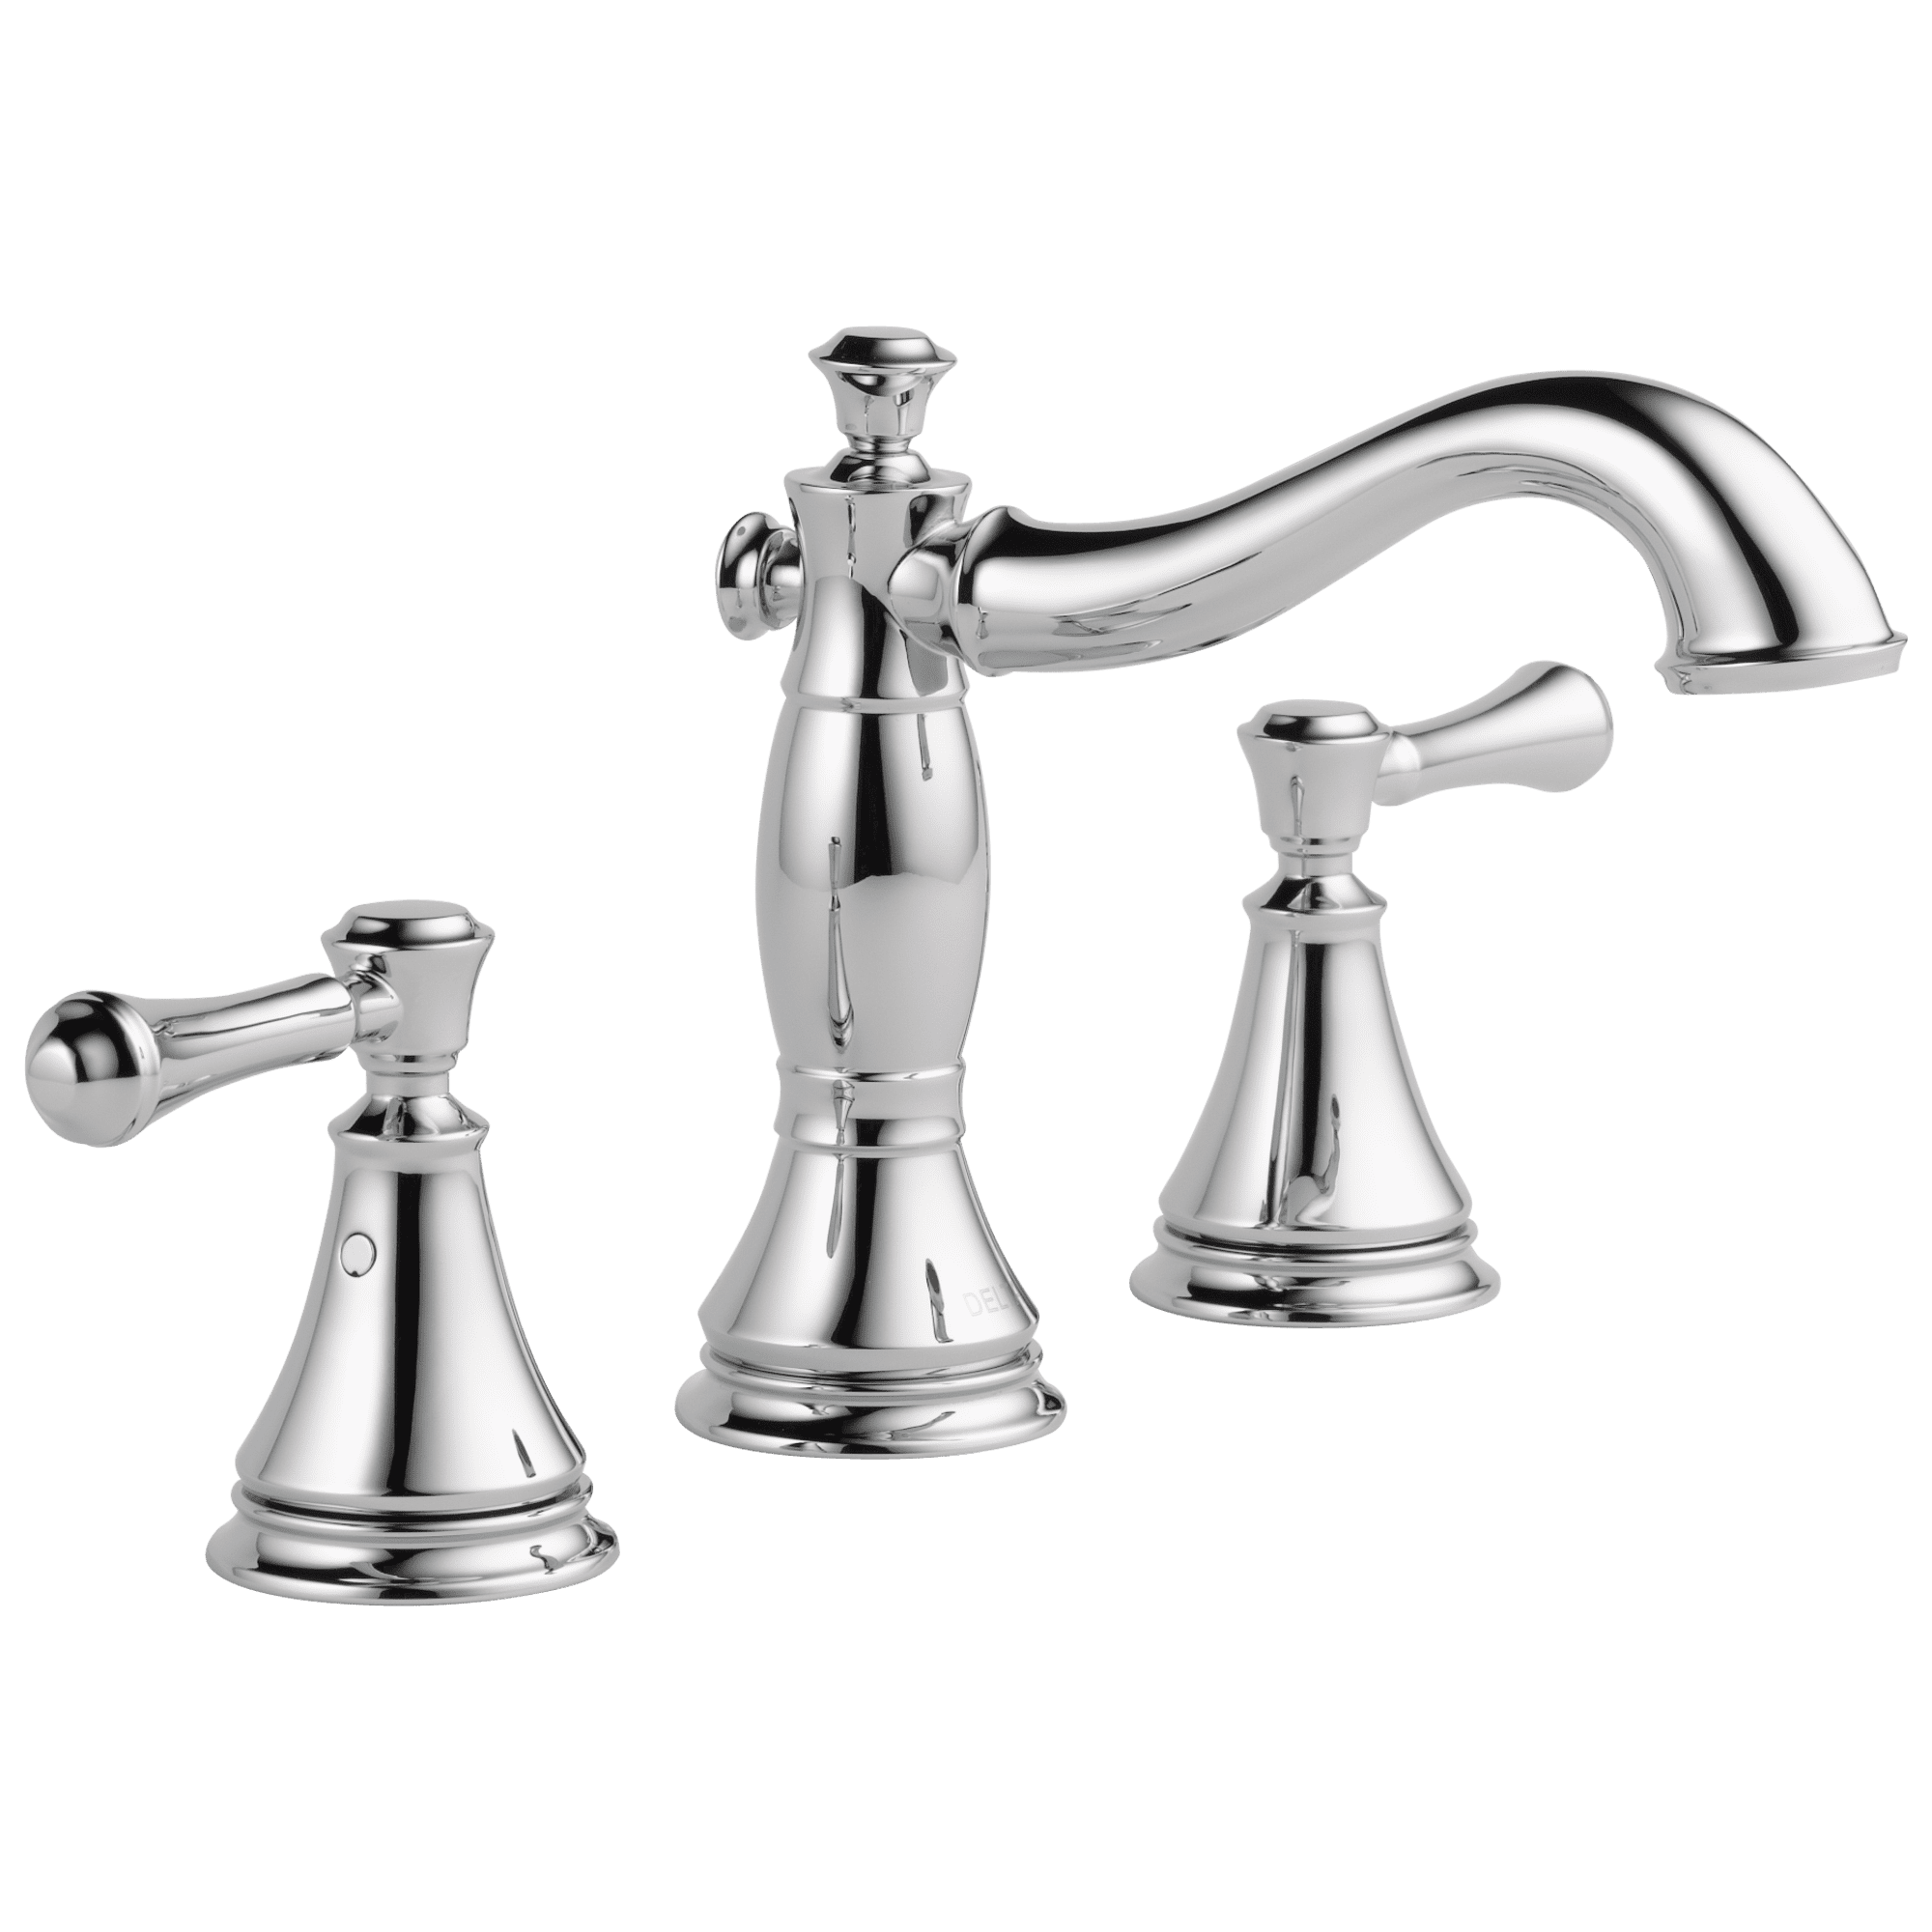  Moen WS84912 Banbury Two-Handle Low Arc Bathroom Faucet, Pack  of 1, Chrome : 家居裝修